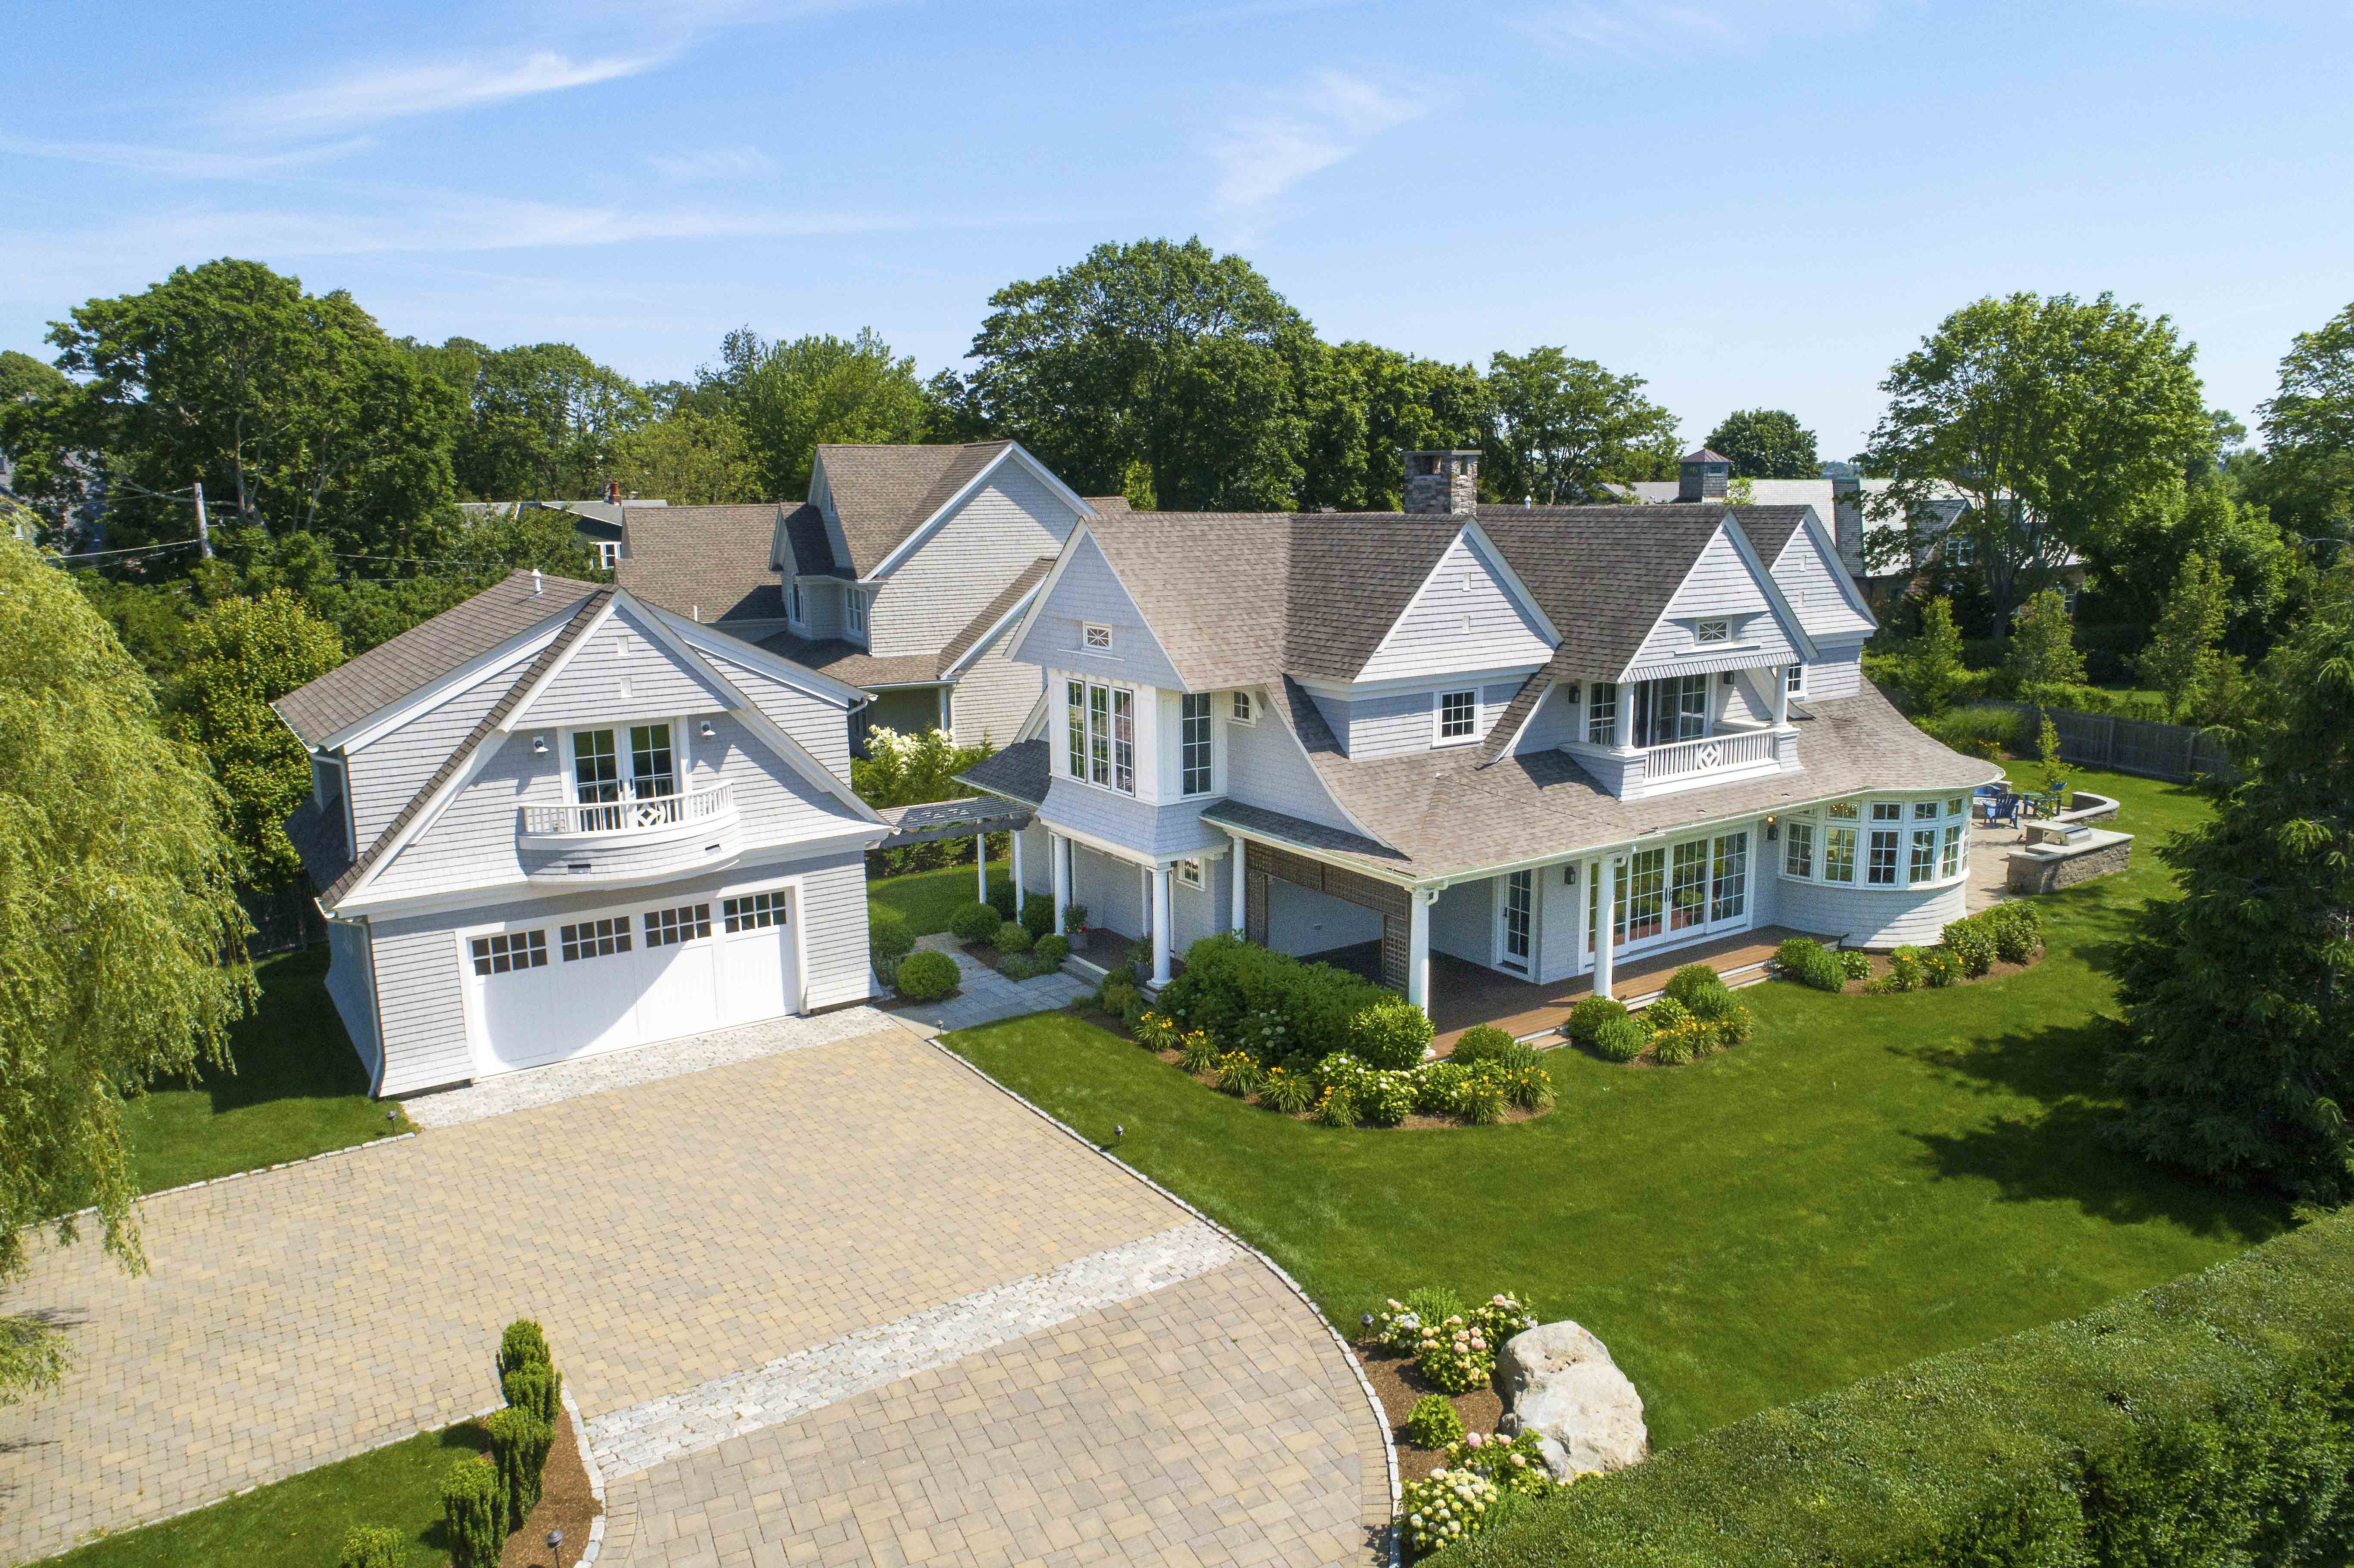 FAXON GREEN COLONIAL SELLS FOR $2.6M, MARKING ONE OF THE TOP THREE RESIDENTIAL SALES  IN NEWPORT YEAR-TO-DATE*